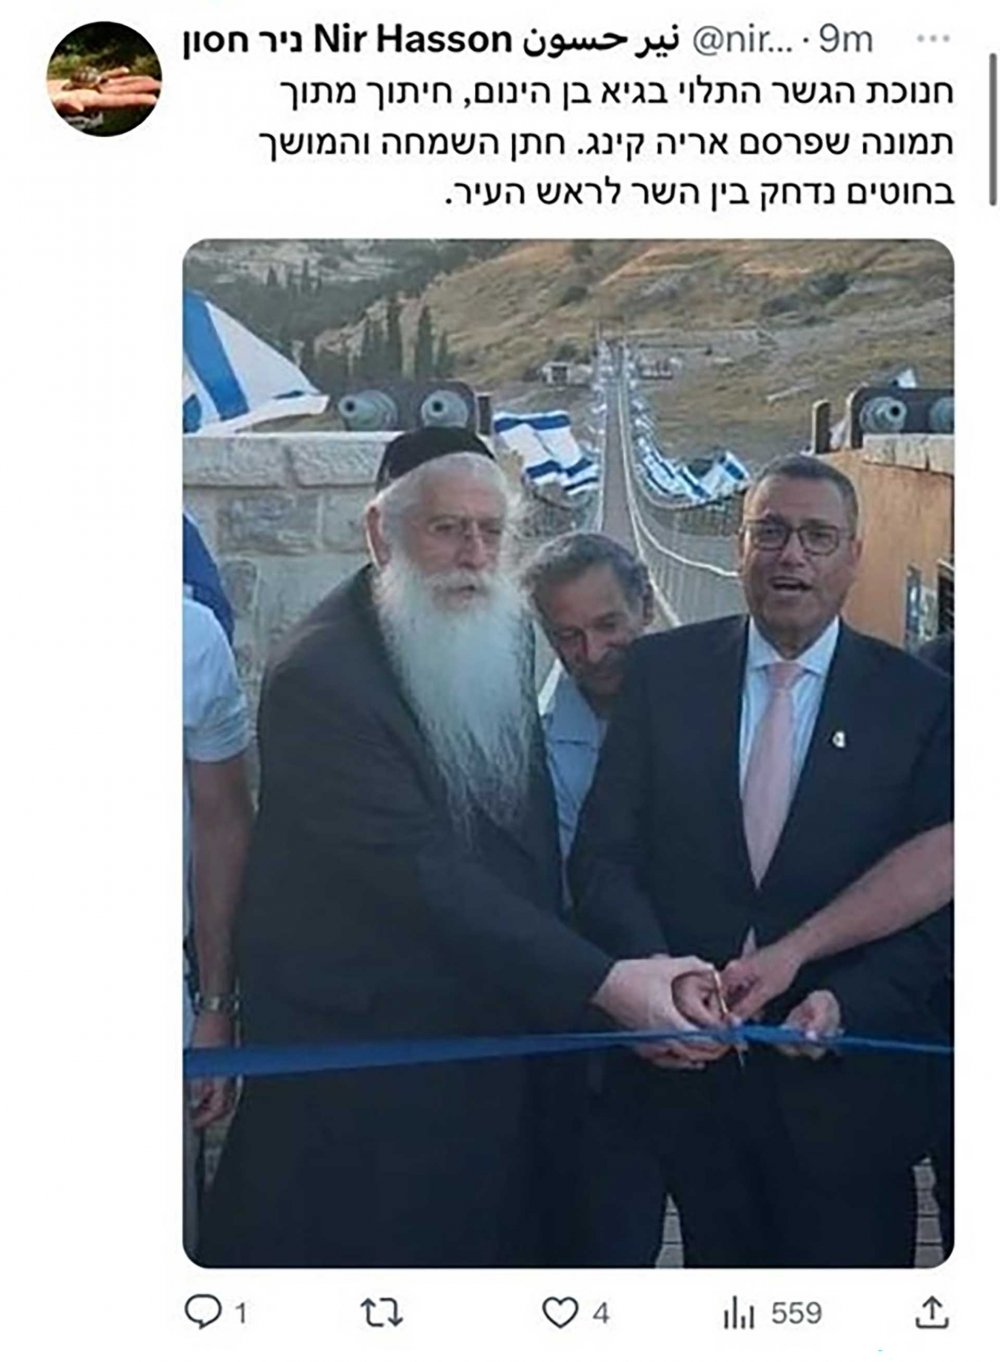 Inauguration of suspension bridge as part of plan to Judaize Holy Basin